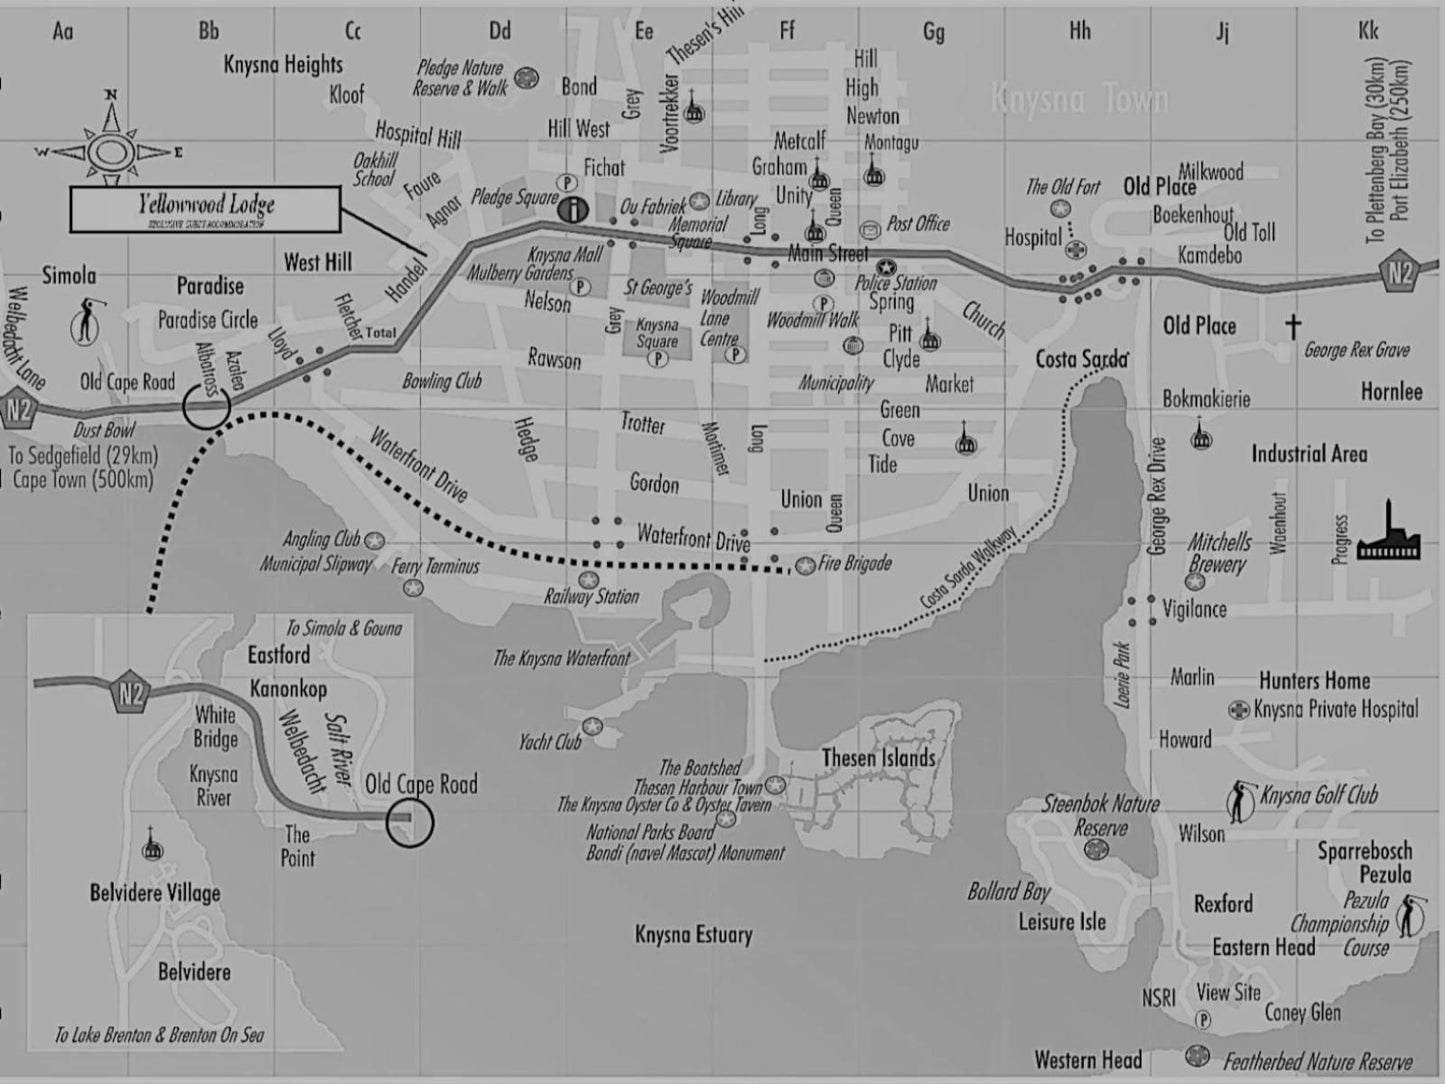 Knysna Yellowwood Lodge West Hill Knysna Western Cape South Africa Colorless, Black And White, Map